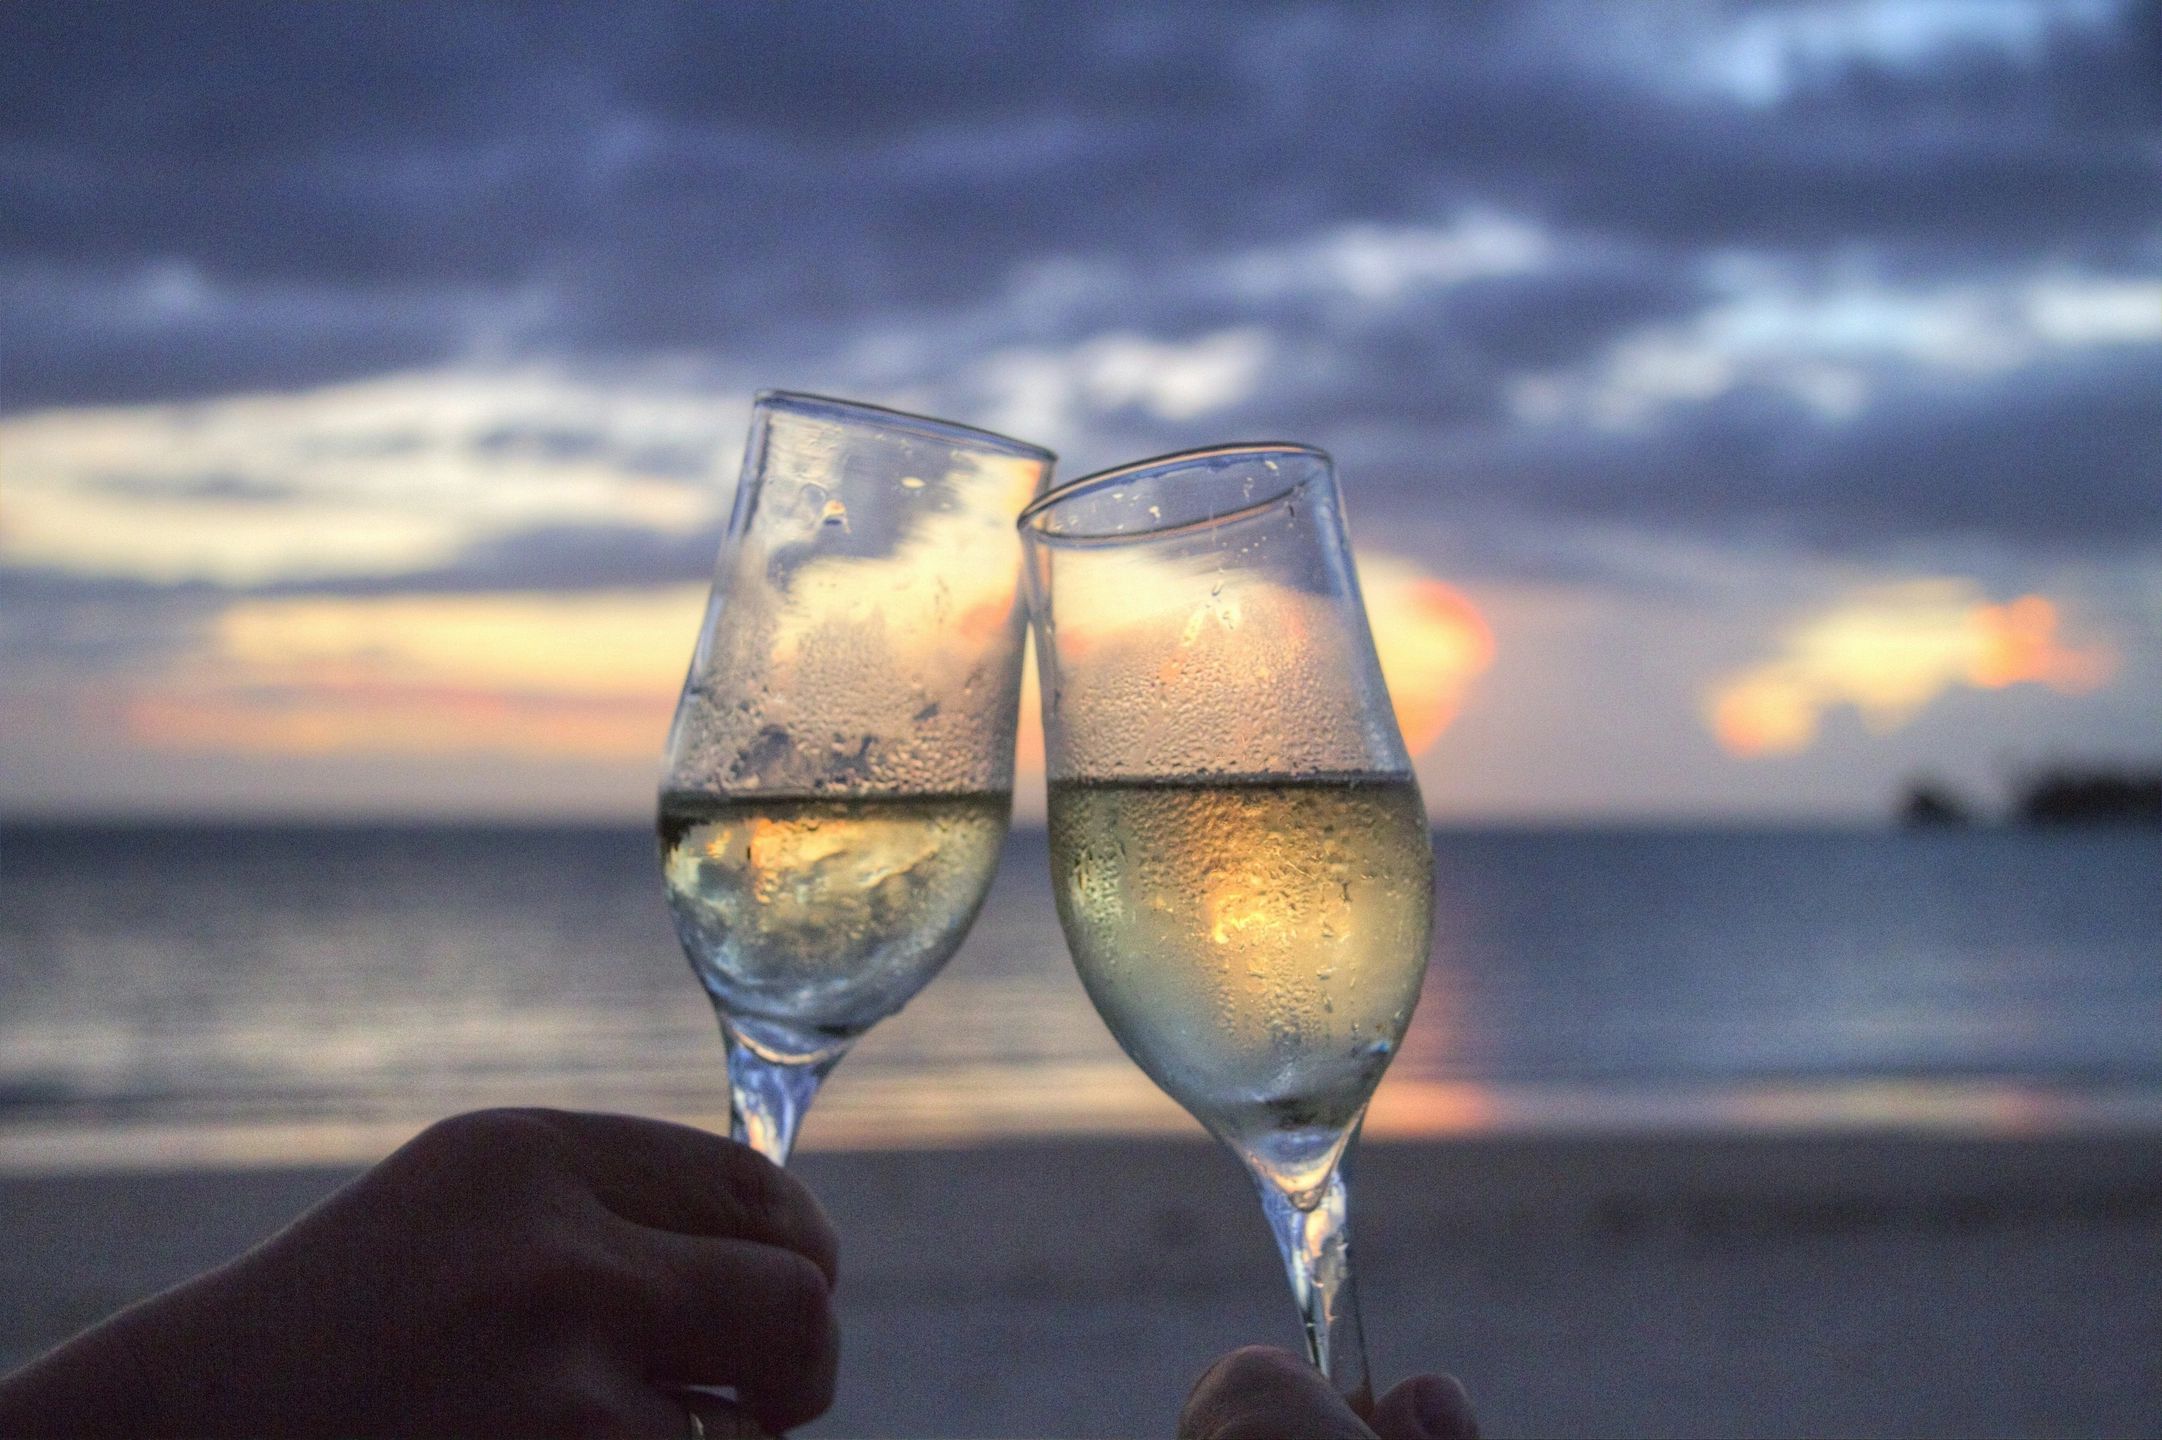 Two champagne glasses being clinked together while on a beach during sunset